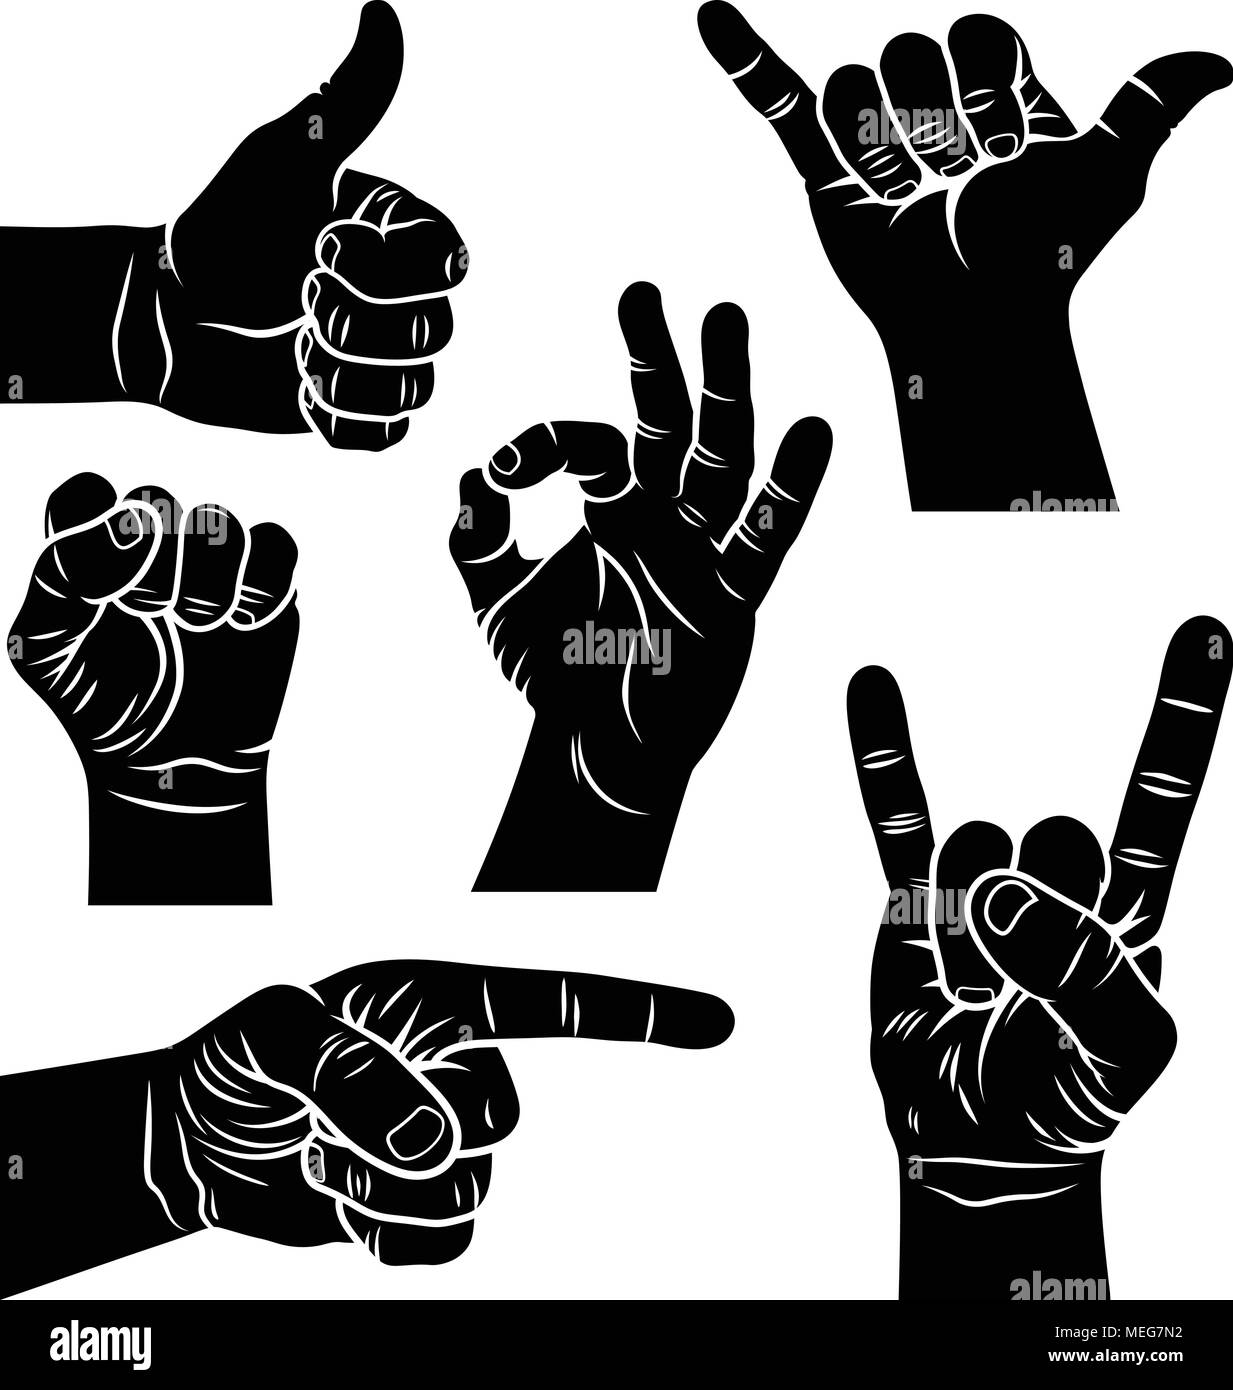 Hand gestures and signs. Shaka sign, male fist, a hand showing symbol Like, pointing hand, Rock and Roll hand sign, Ok hand sign. Vector illustration Stock Vector